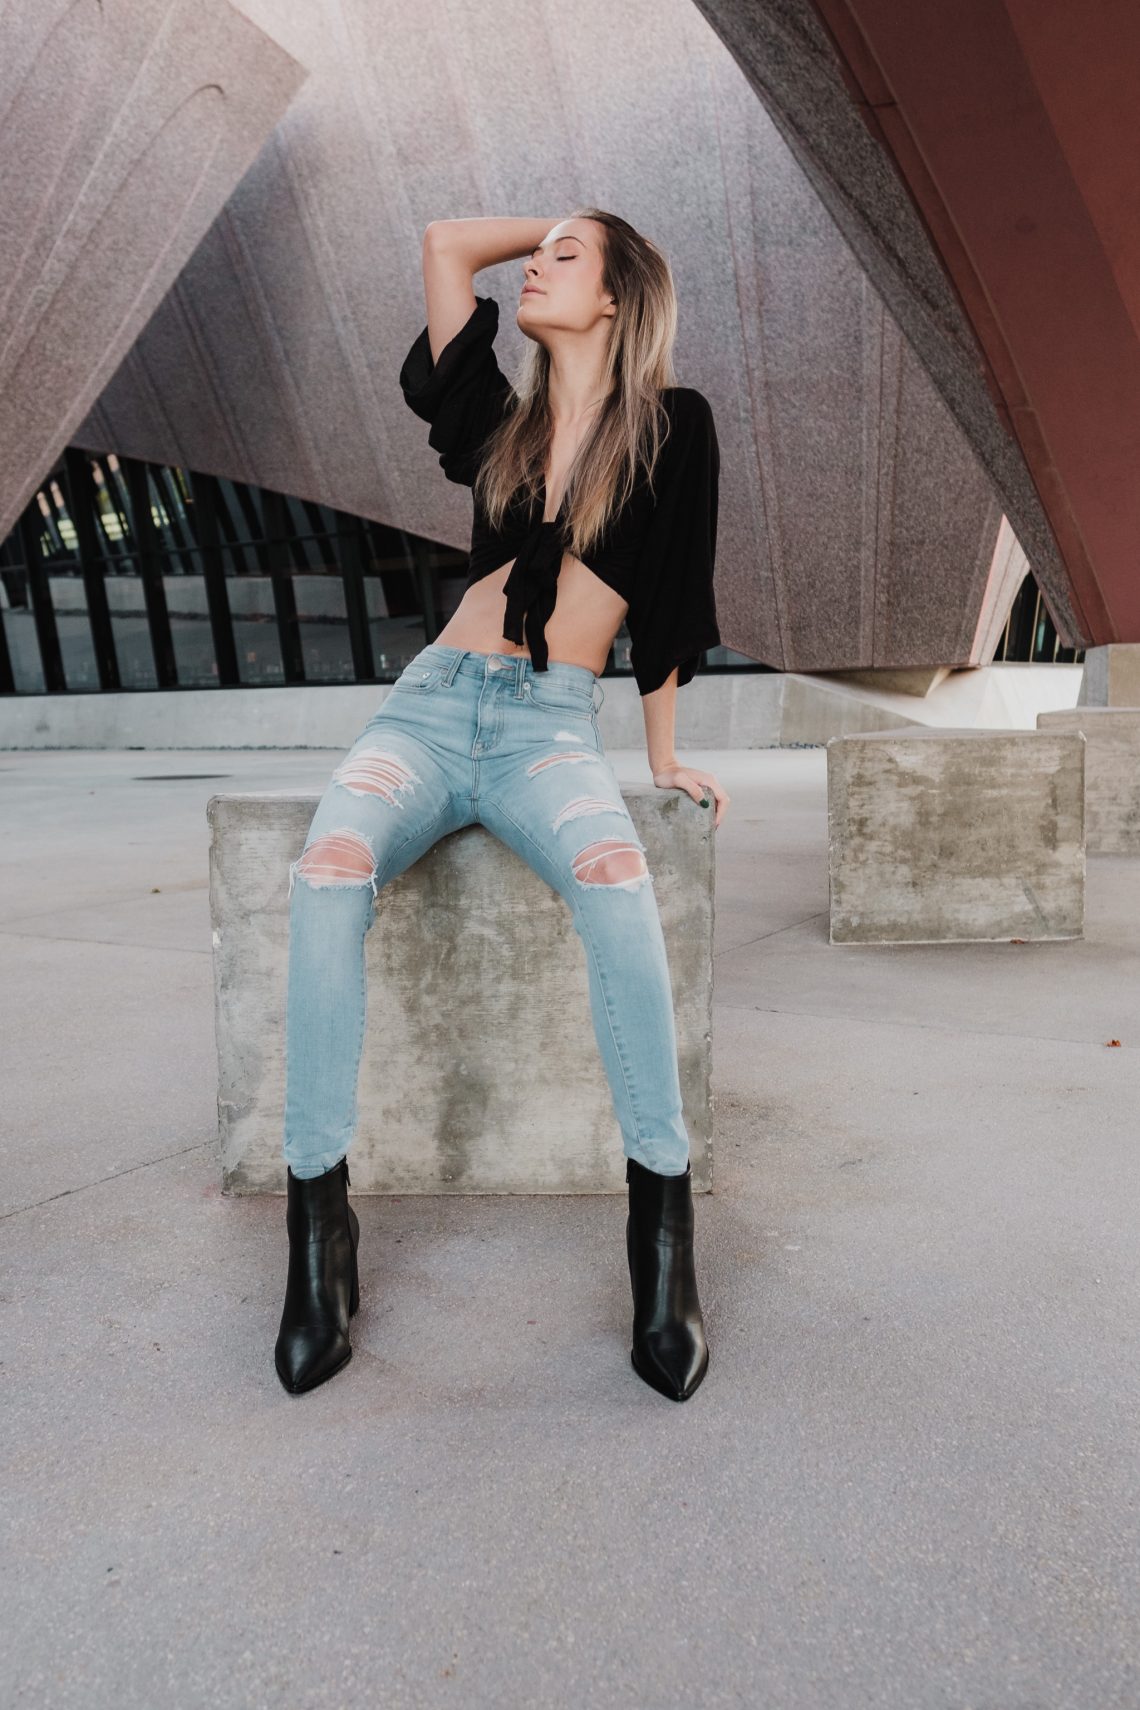 Woman in black crop top and blue denim jeans sitting on concrete bench